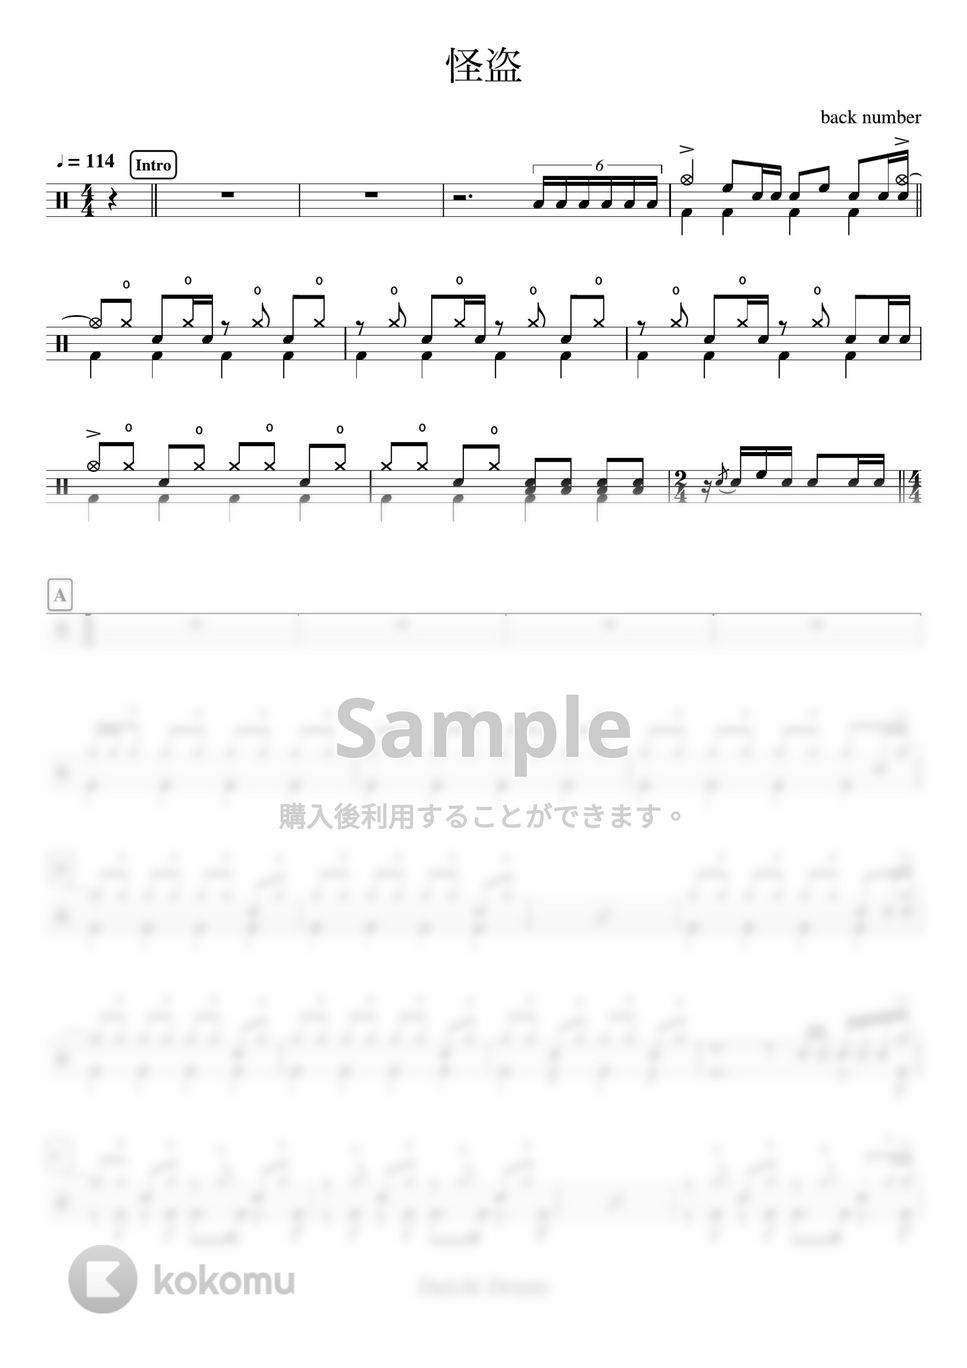 back number - 怪盗 by Daichi Drums